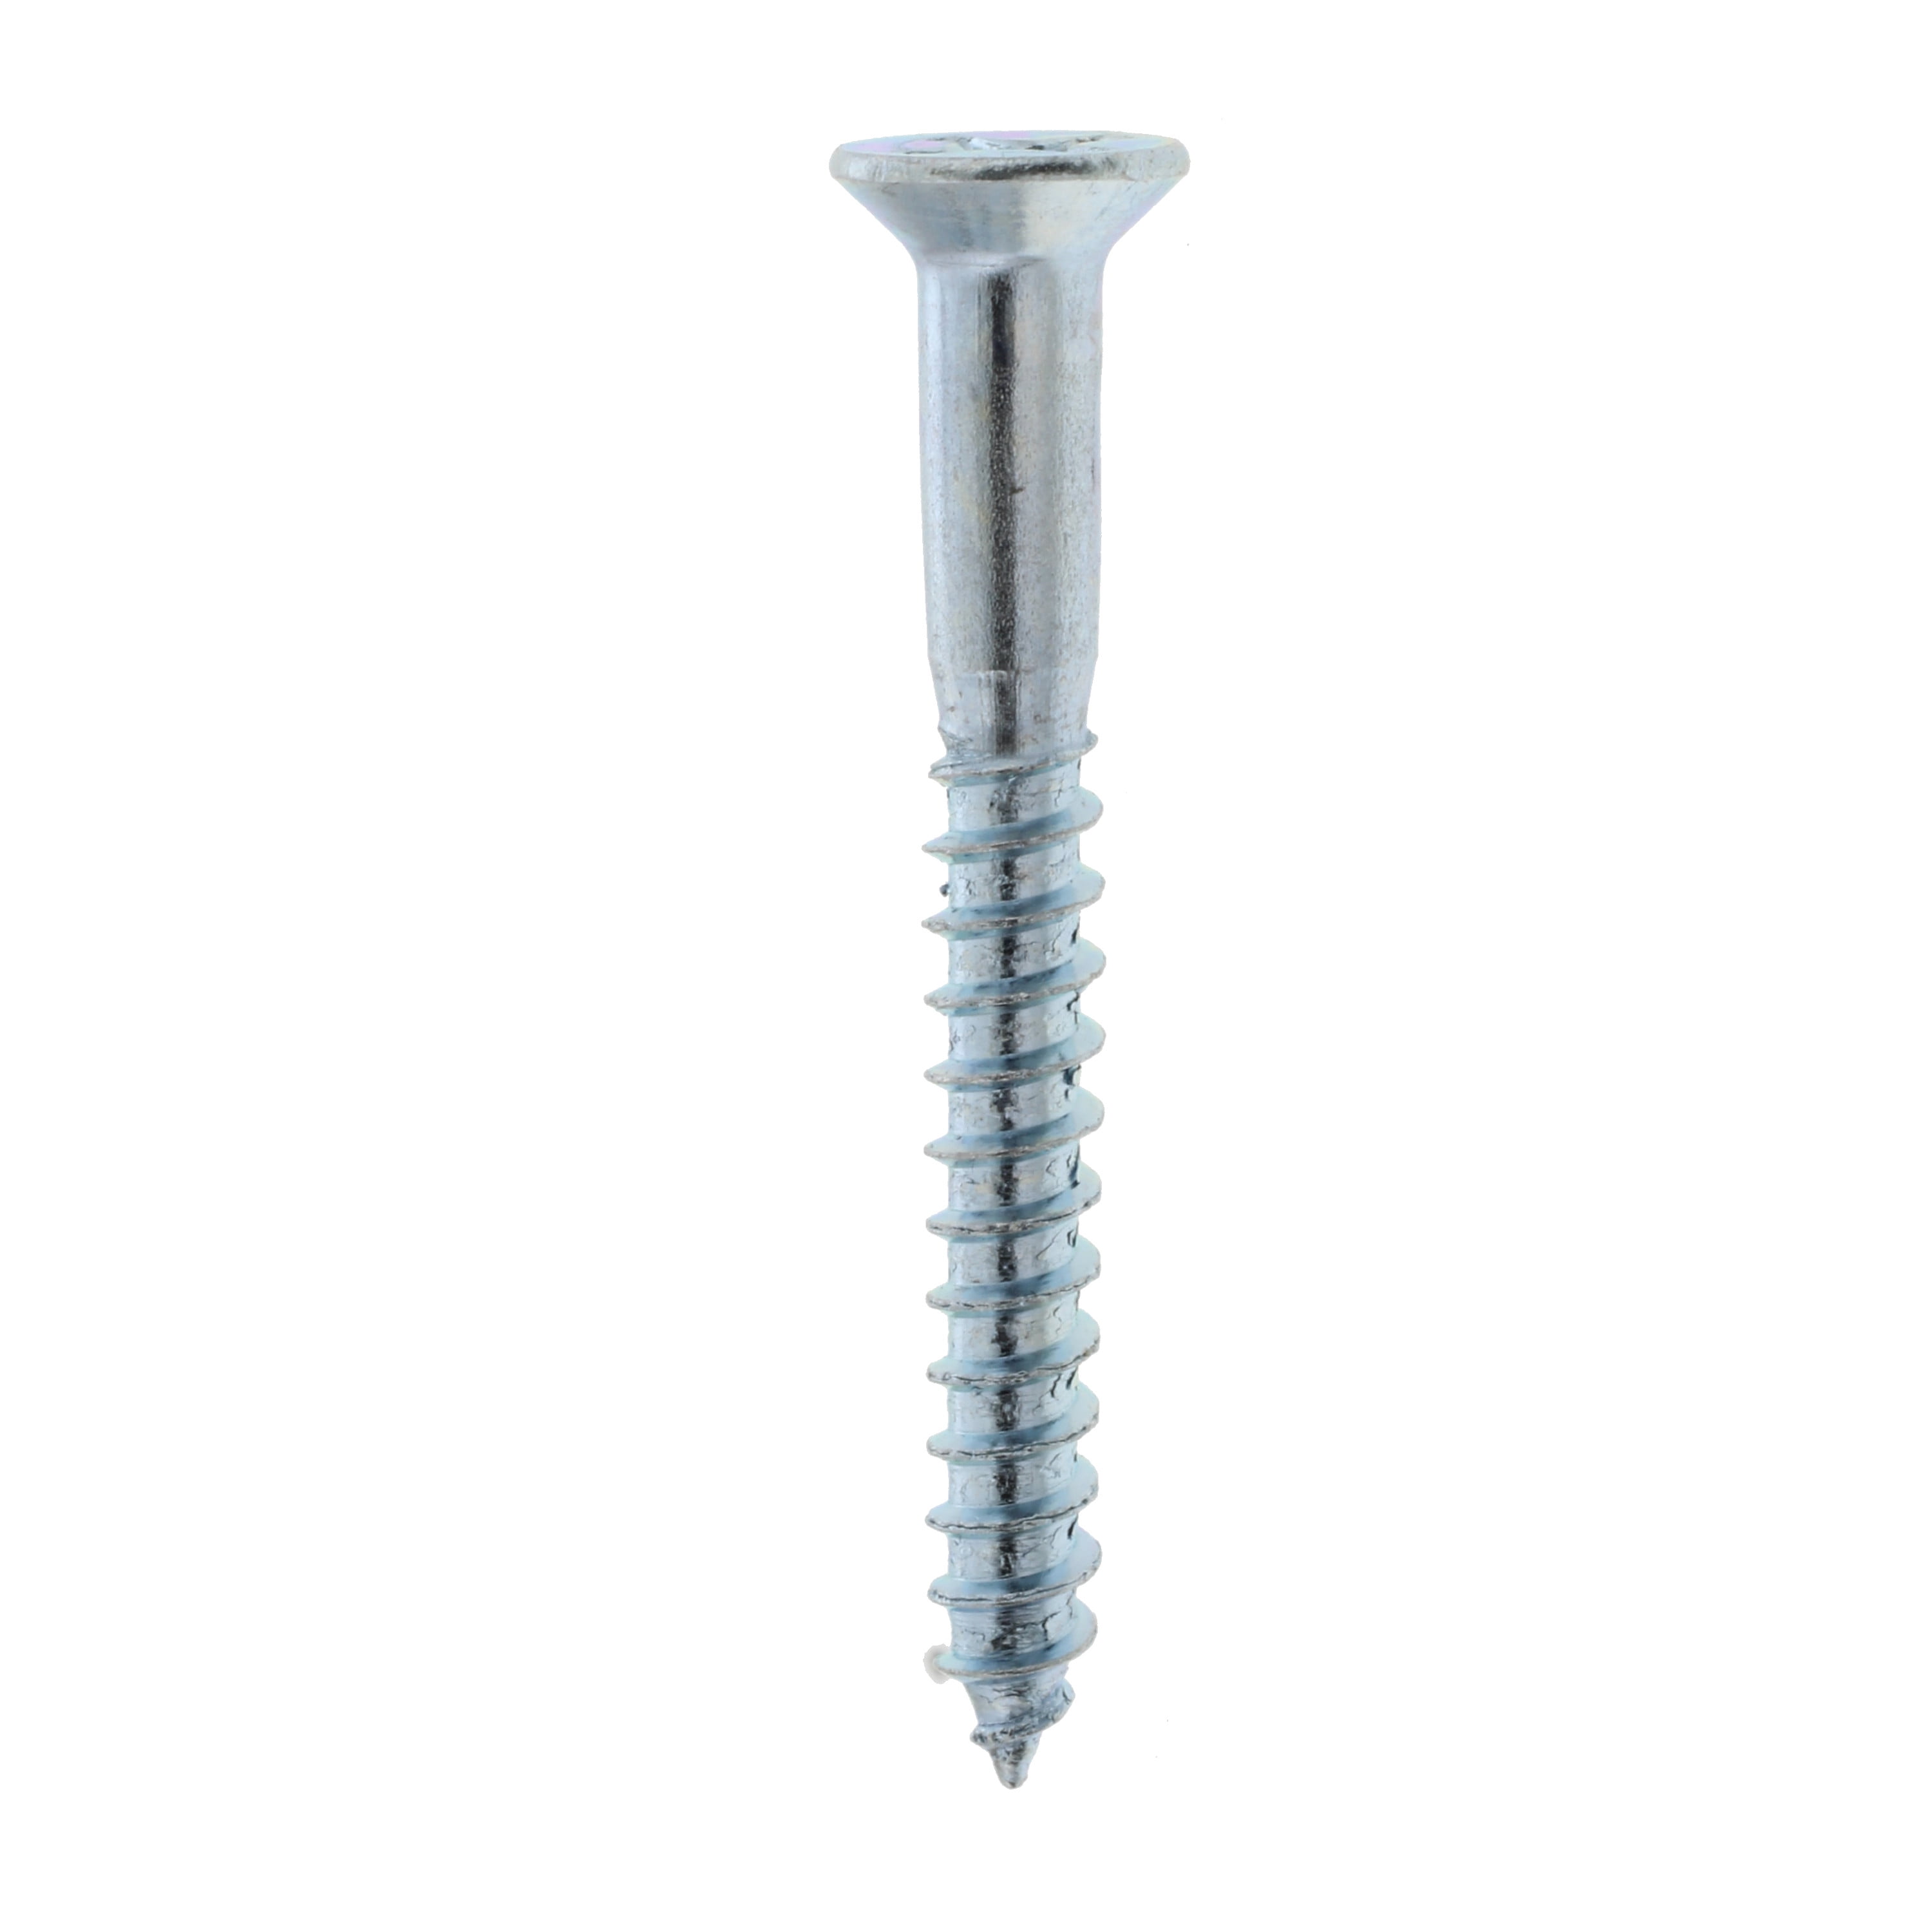 100-Pack The Hillman Group 21130 1 1 1 8 x 3-Inch Round Head Phillips Wood Screw 